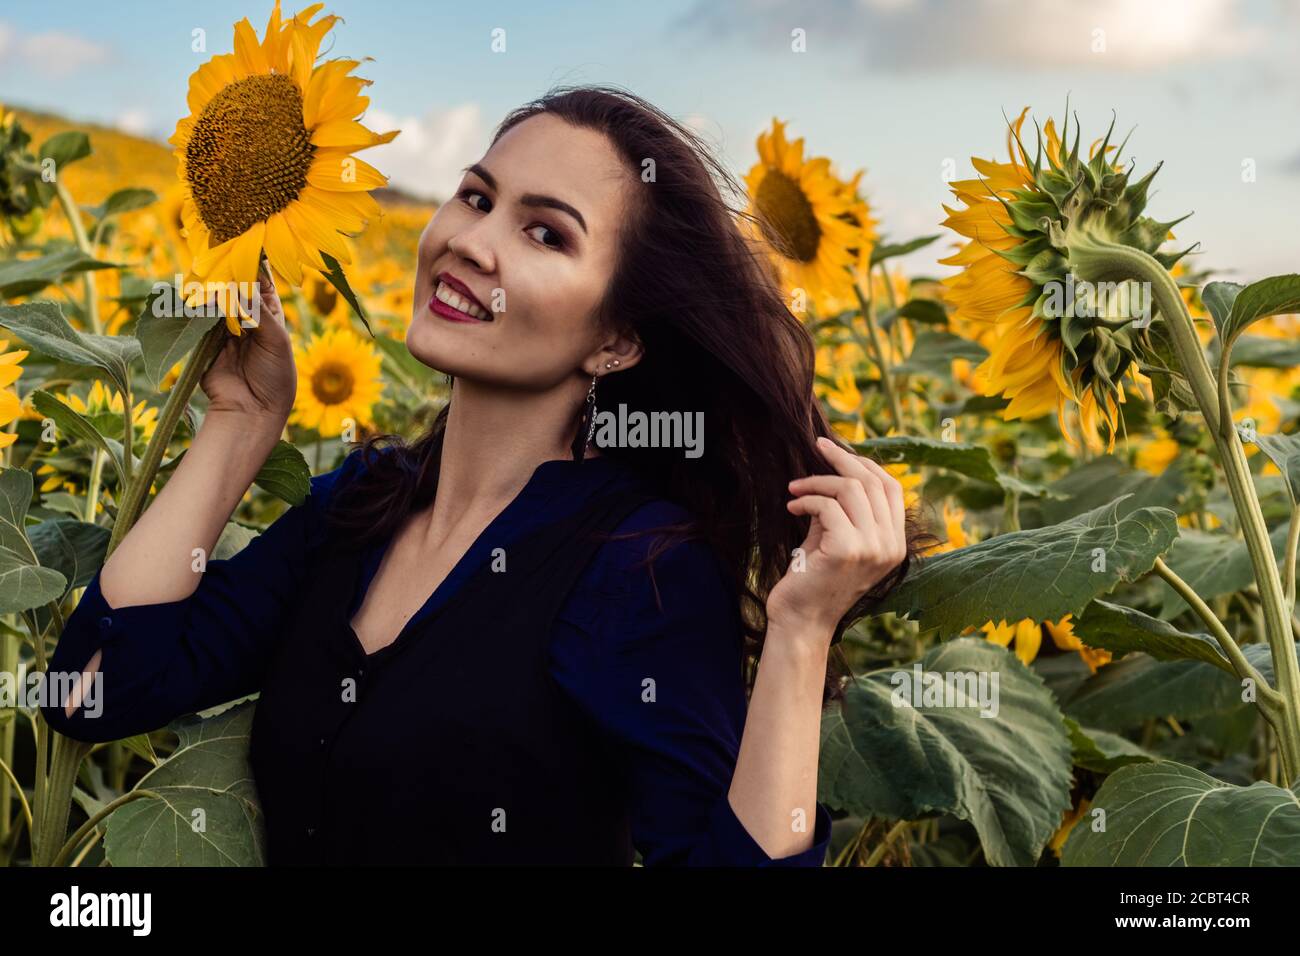 Asian girl is surrounded by sunflowers and smiling. Field with sunflowers on the background. Stock Photo